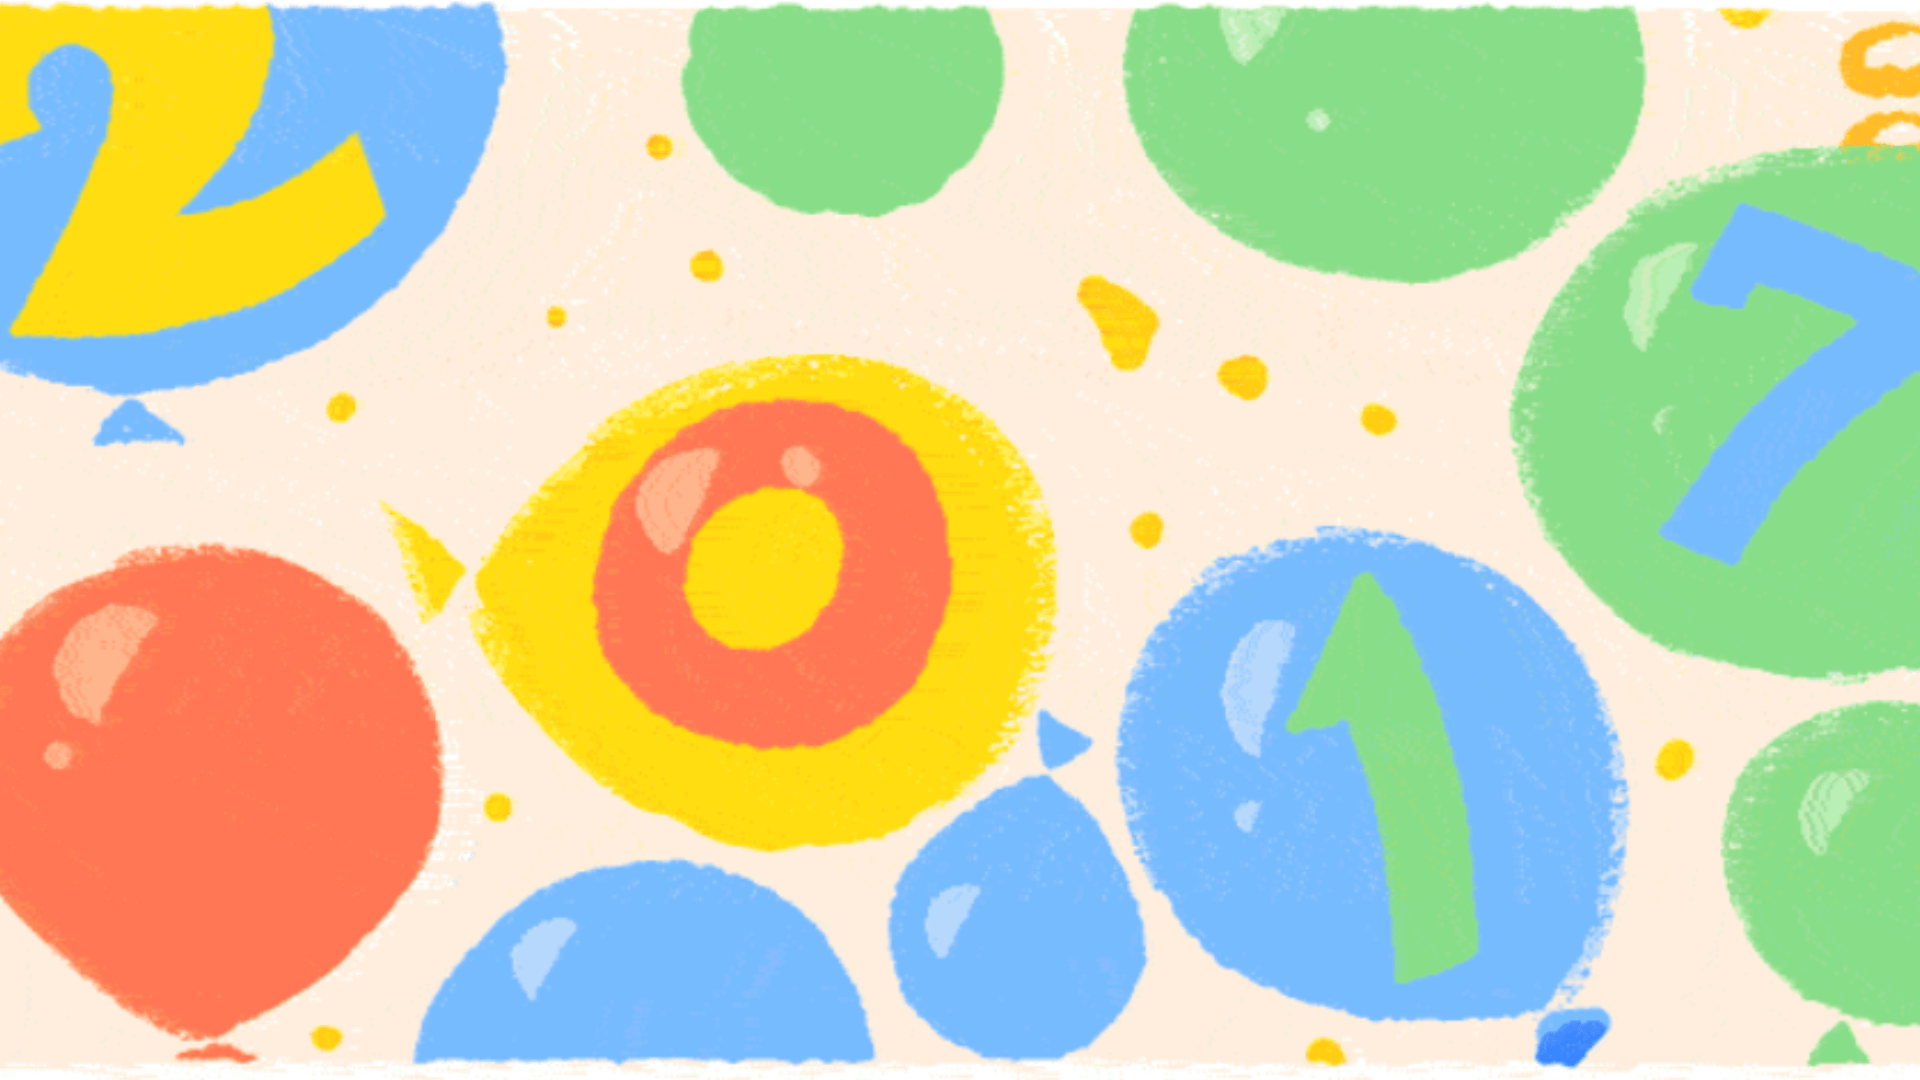 New Years Day 2017 Google Doodle Features Balloon Drop To Mark 1st